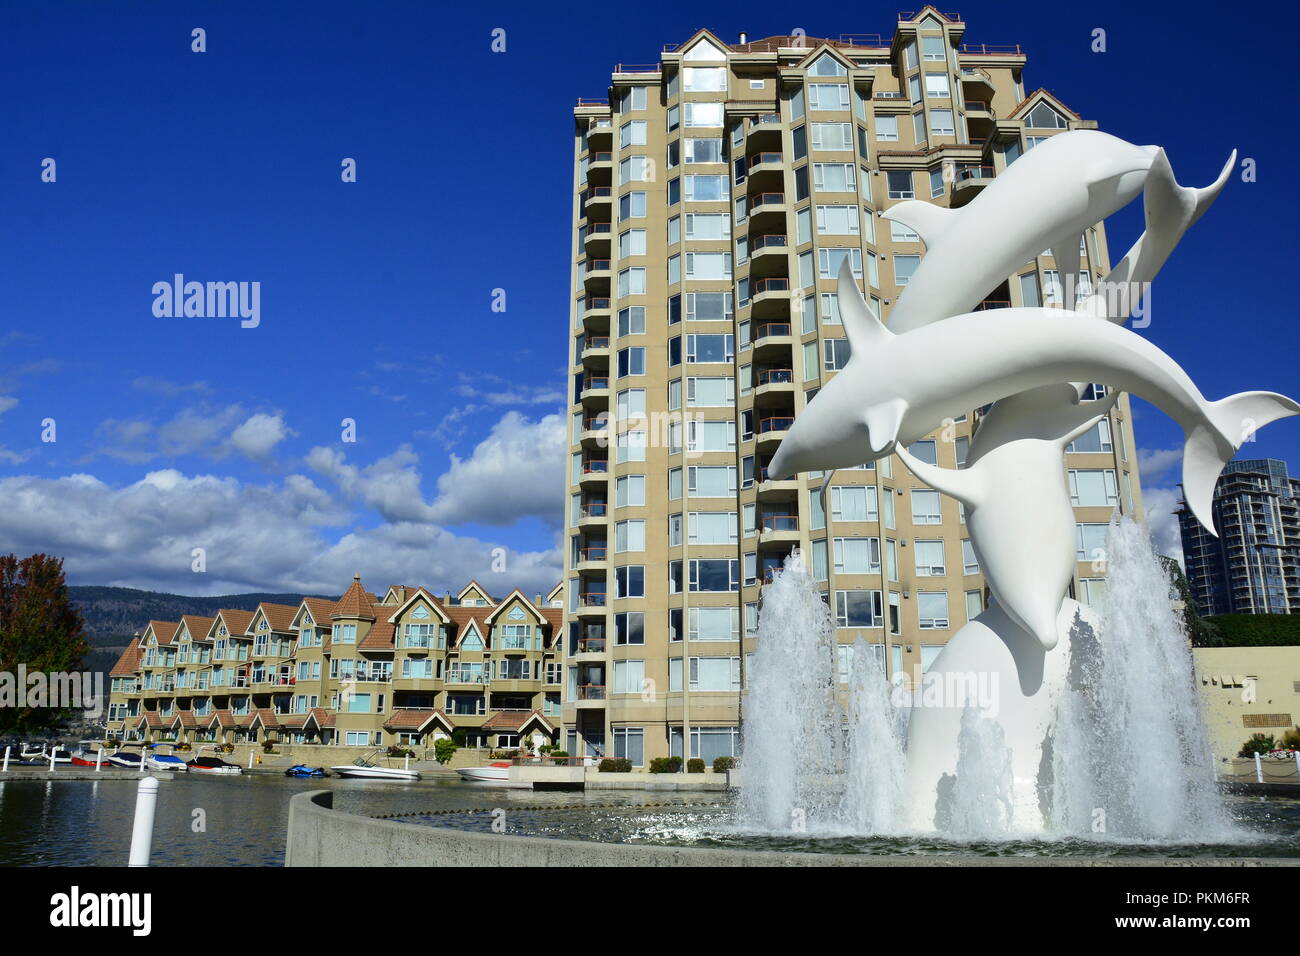 High end real estate in Kelowna BC,Canada. Luxury condo living on the lake in Kelowna in the Okanagan Valley. Stock Photo